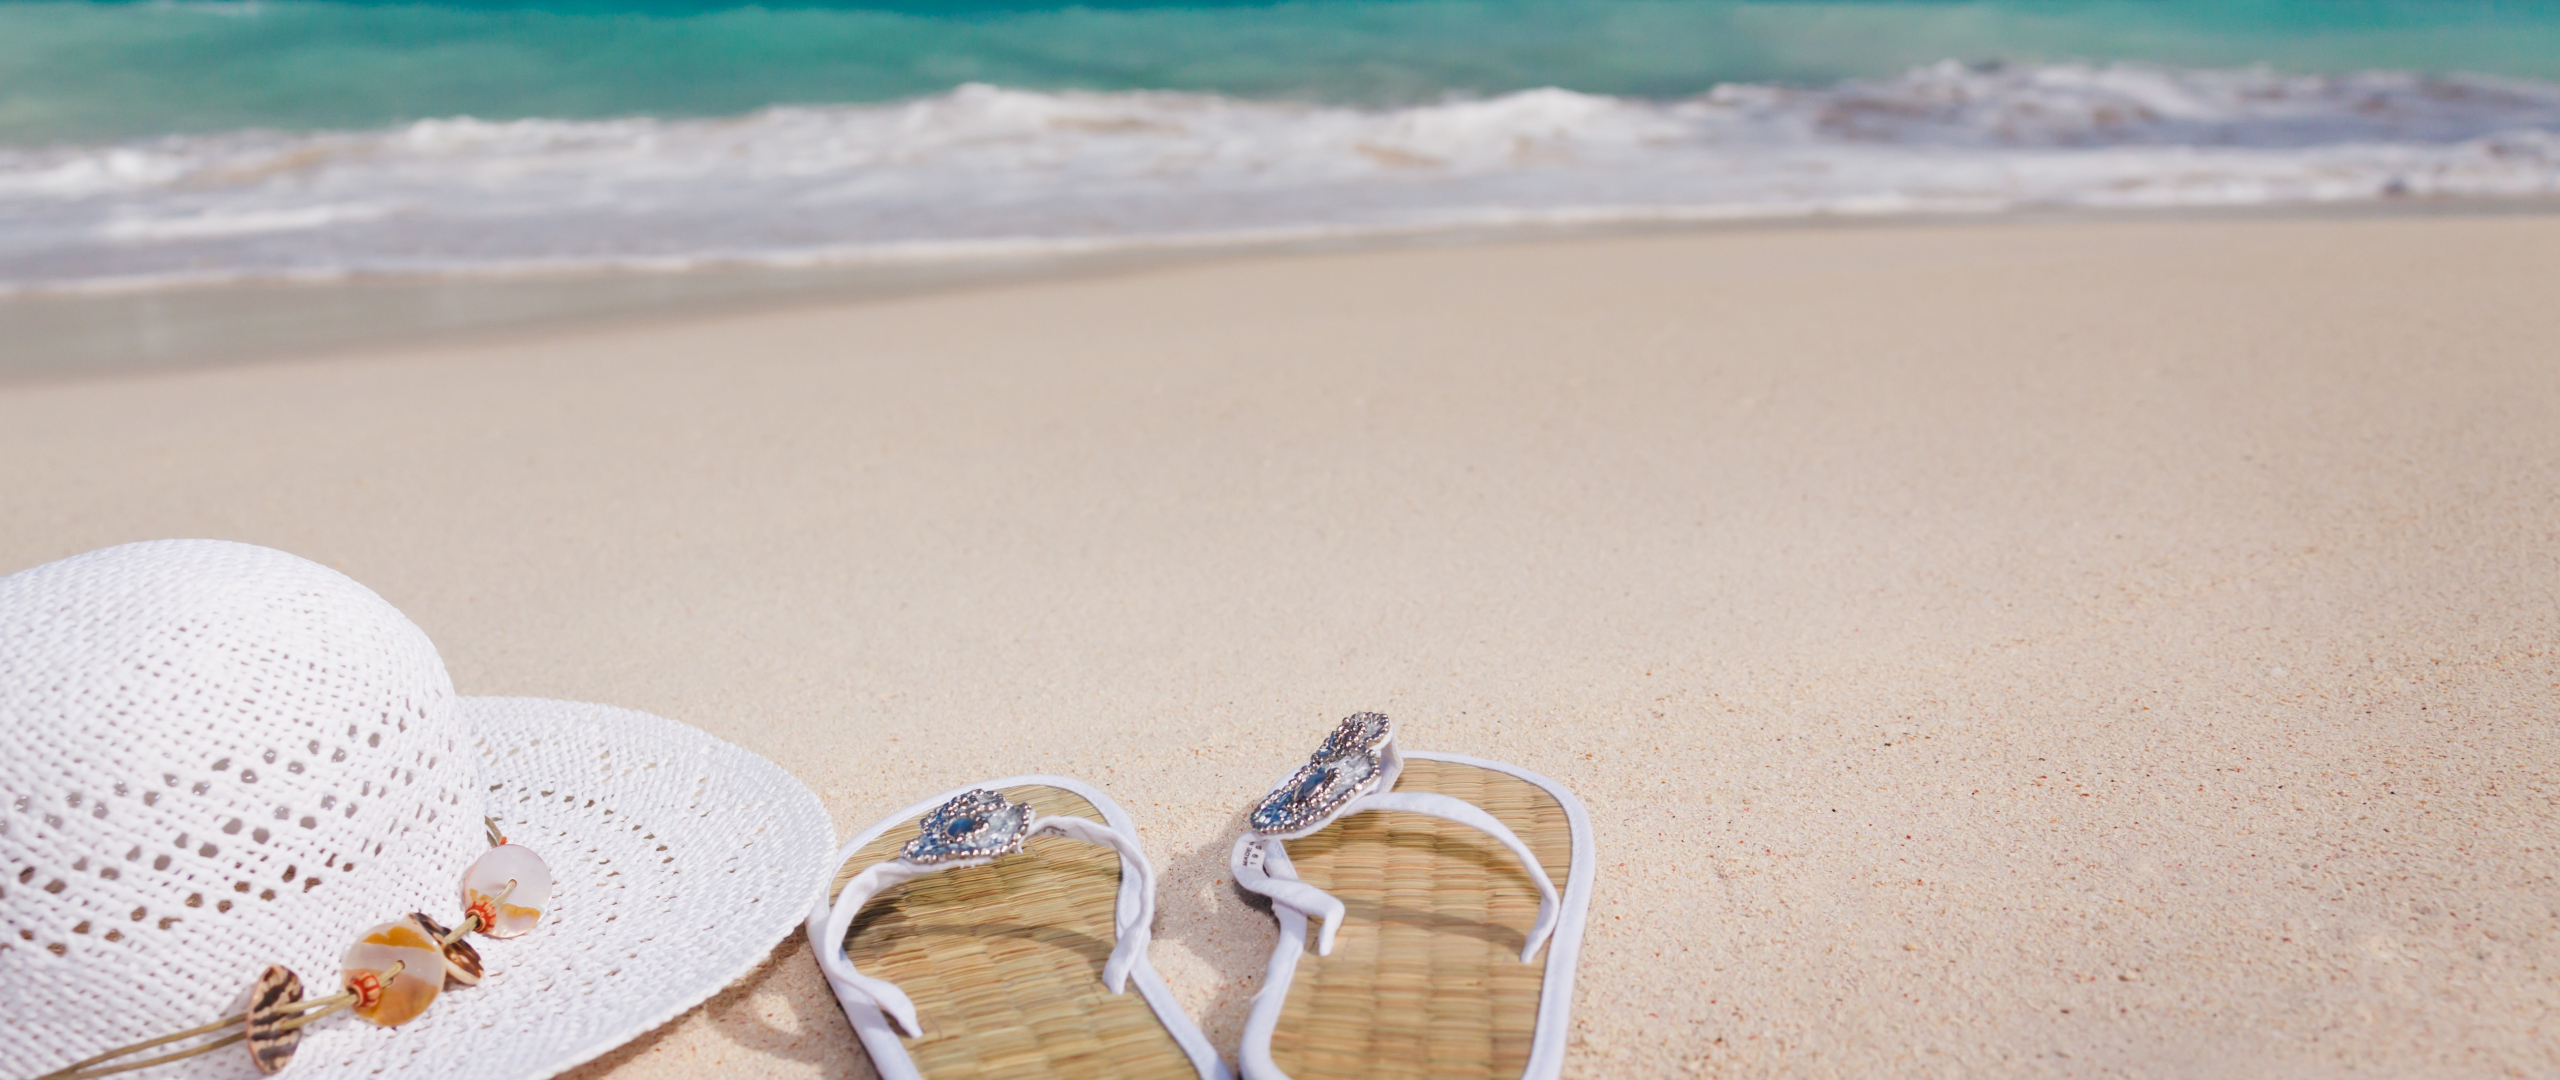 Download 2560x1080 wallpaper holiday, summer, hat, beach, slippers, dual wide, widescreen, 2560x1080 HD image, background, 626